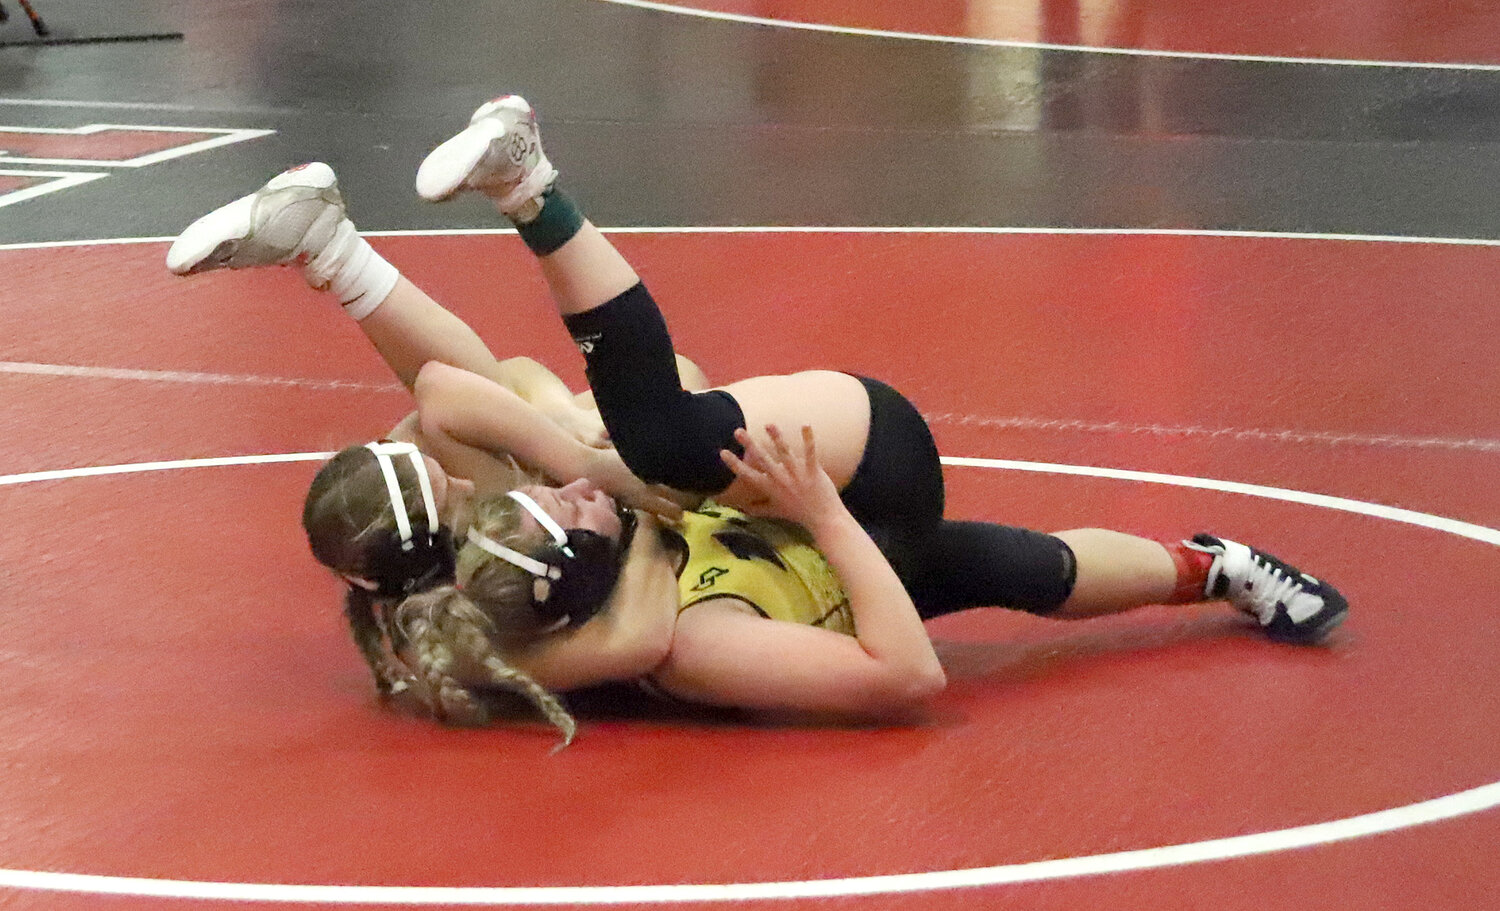 Senior Chloe Sokolik executes a cradle in her title match Monday night at the Fort Madison Invitataion enroute to her first-place finish.